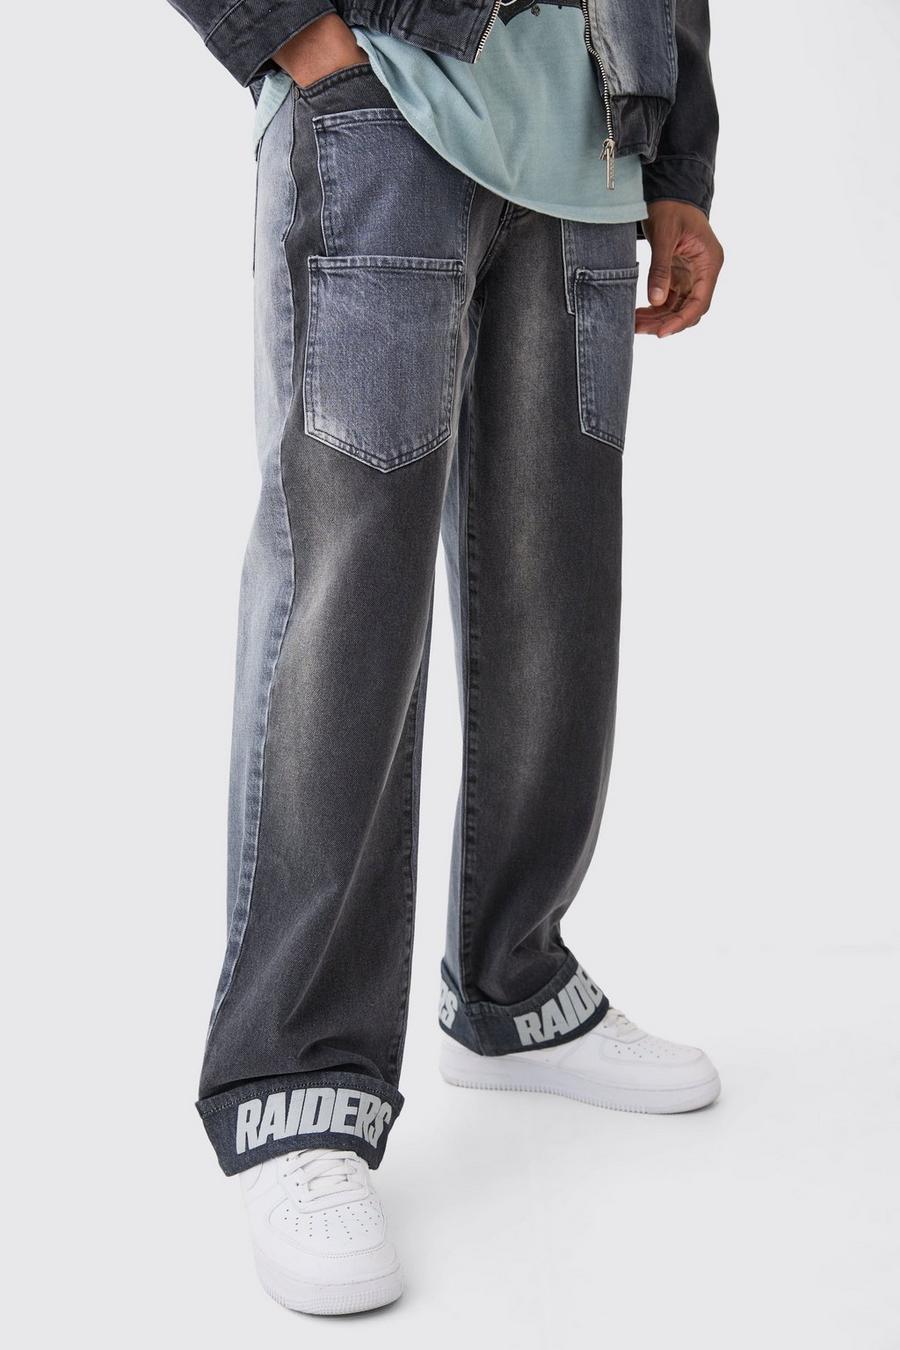 Jeans NFL Raiders extra comodi in denim rigido effetto patchwork con tasche multiple, Charcoal image number 1